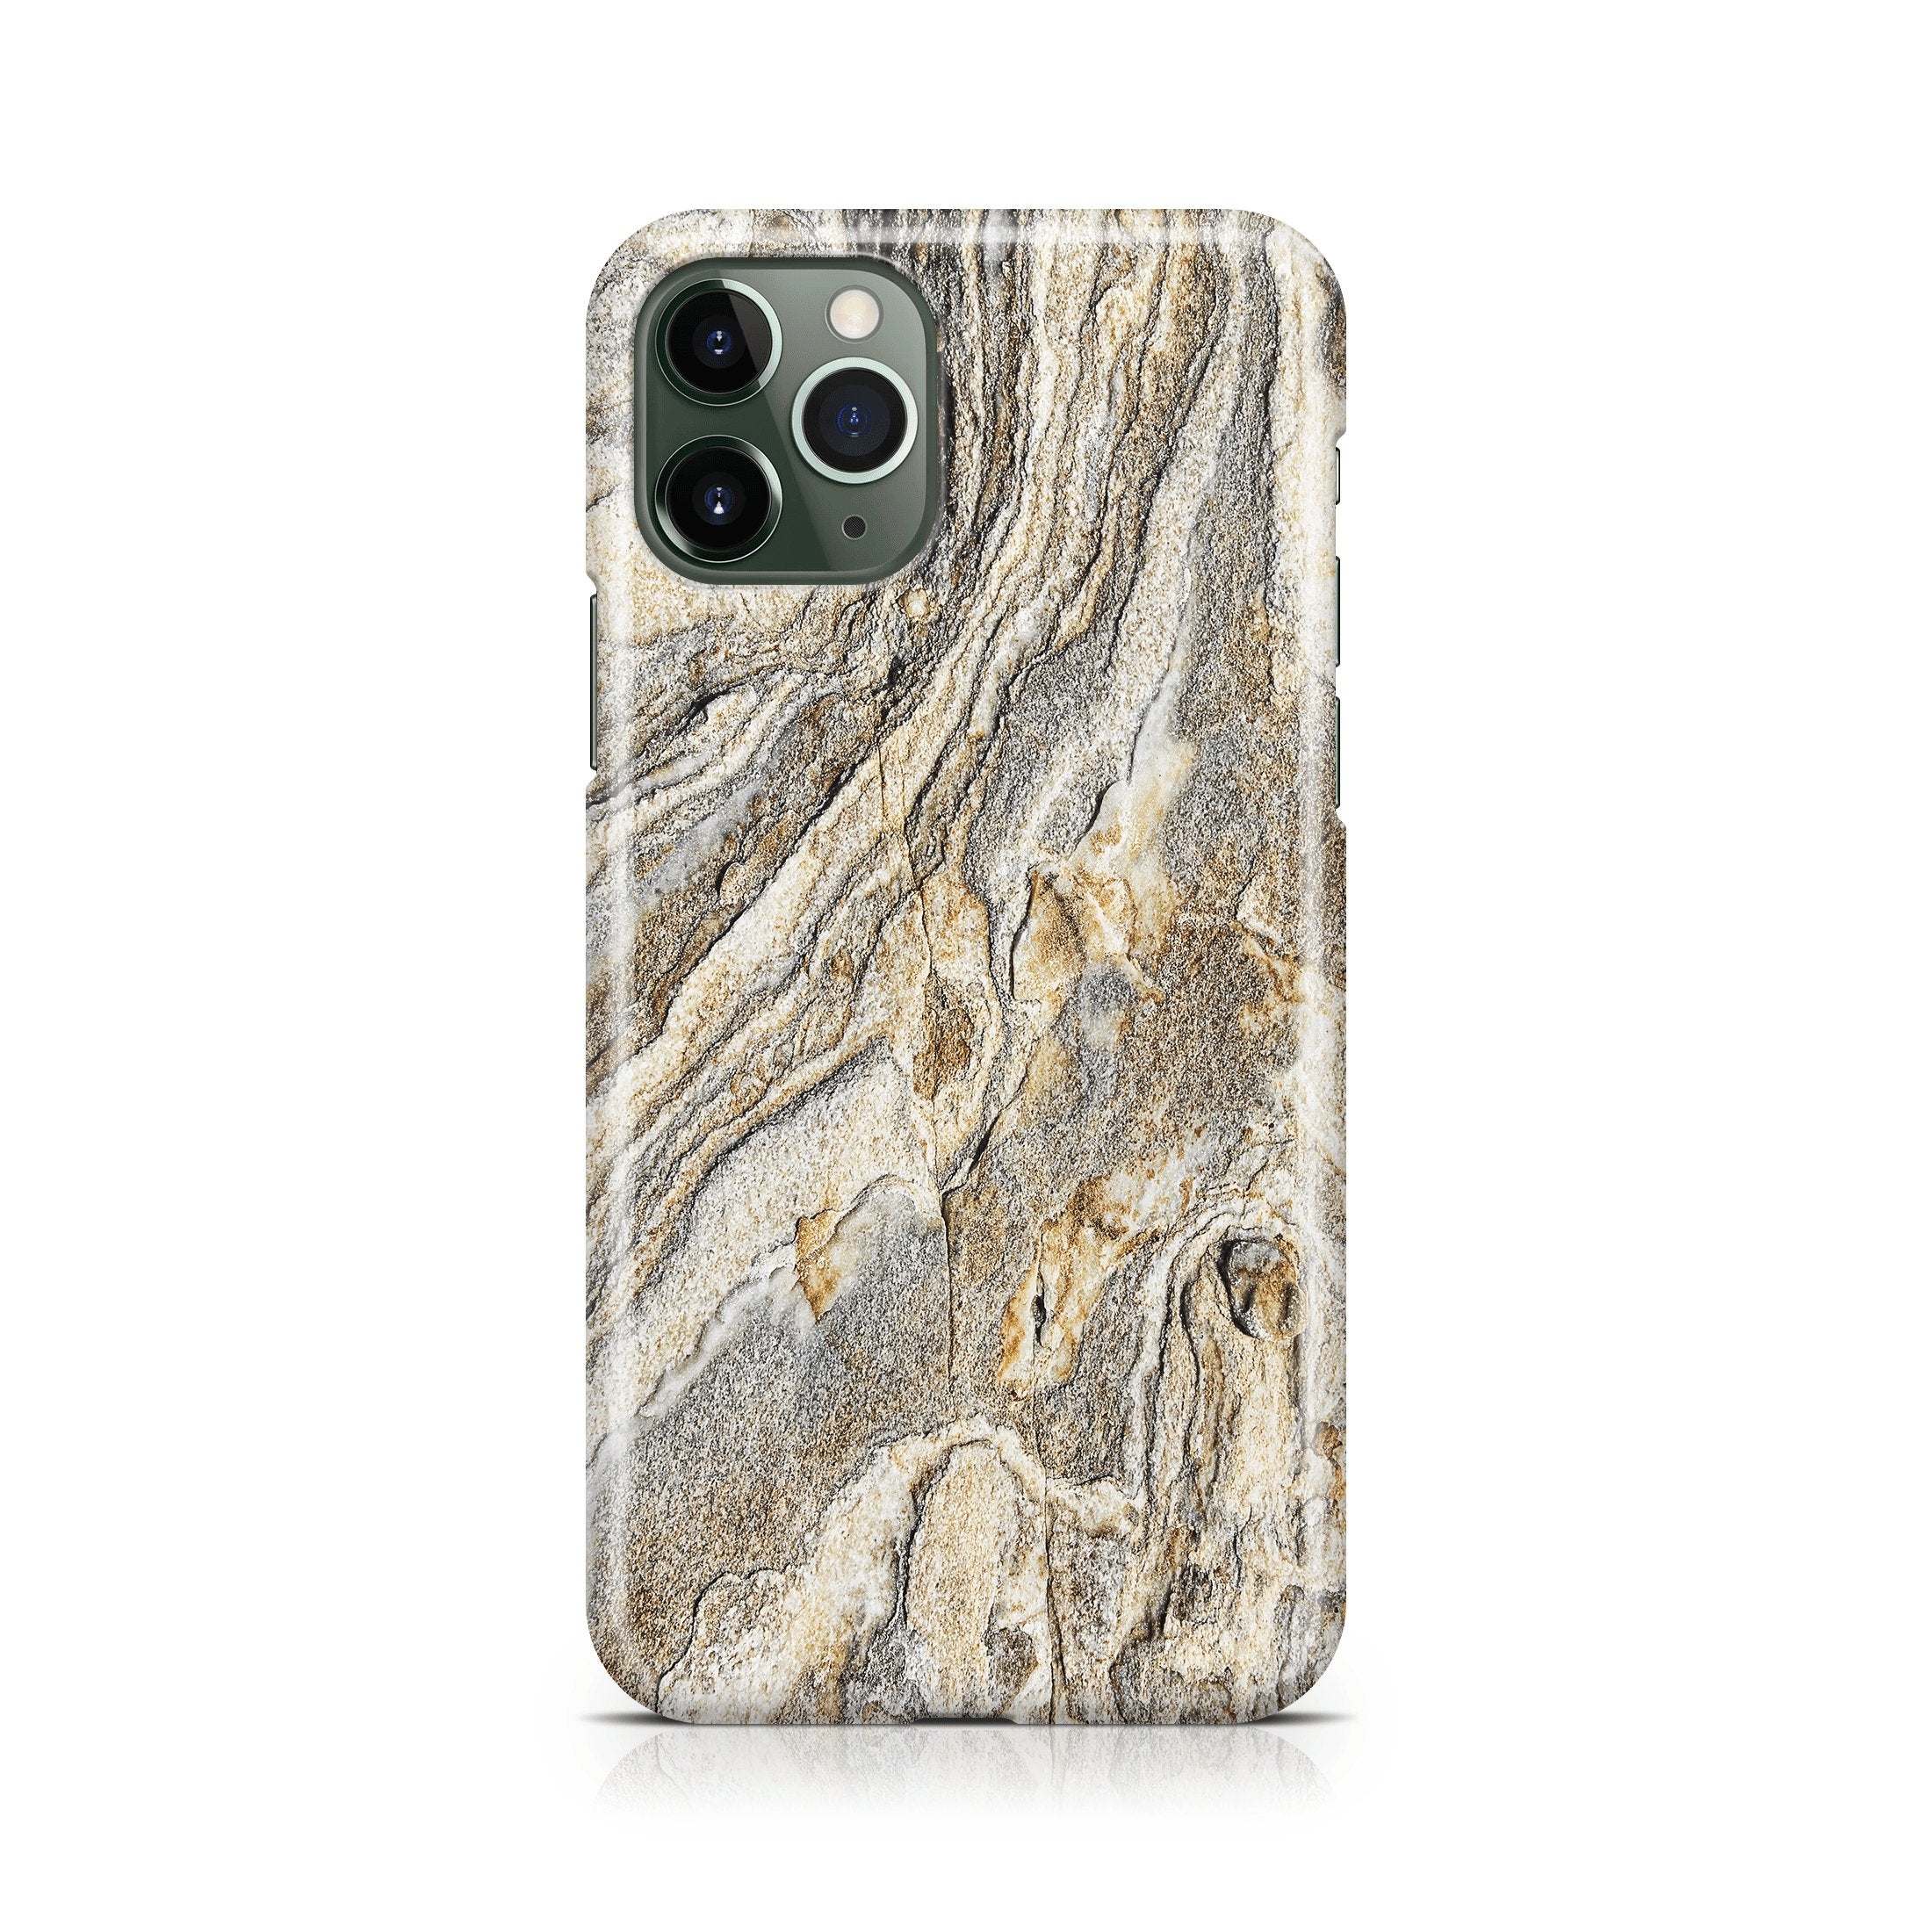 Rough Stone - iPhone phone case designs by CaseSwagger